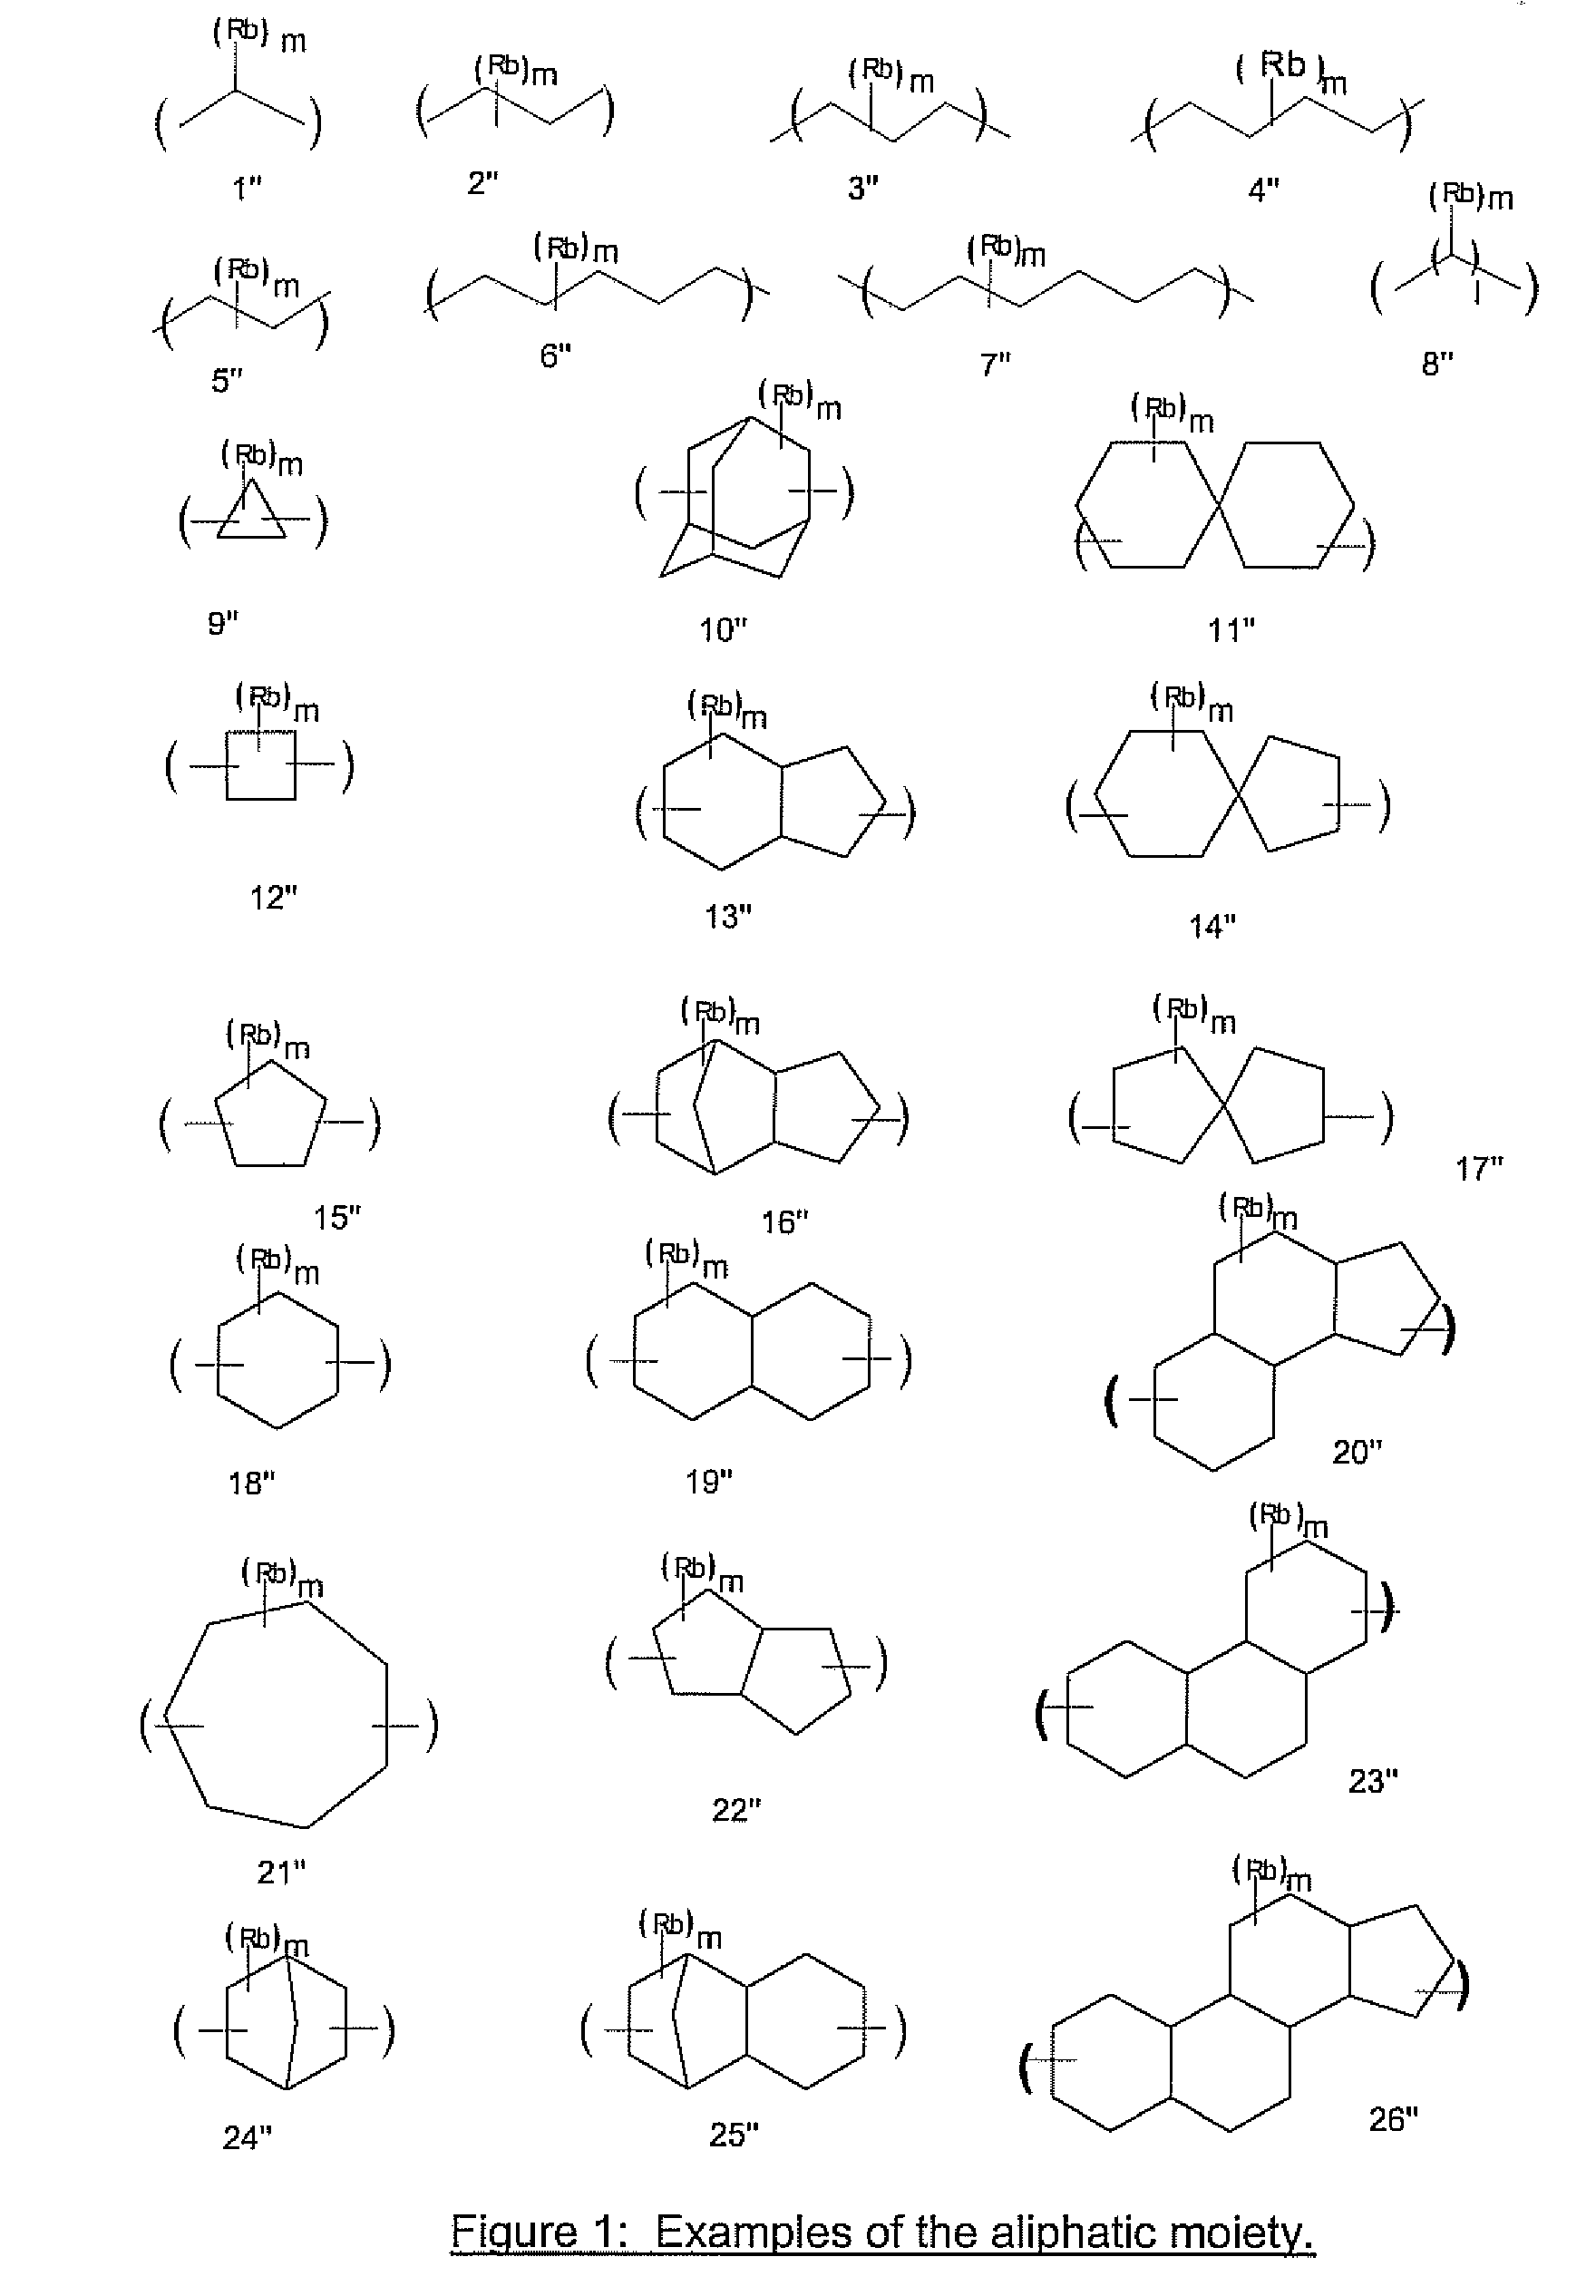 Antireflective Coating Composition Comprising Fused Aromatic Rings